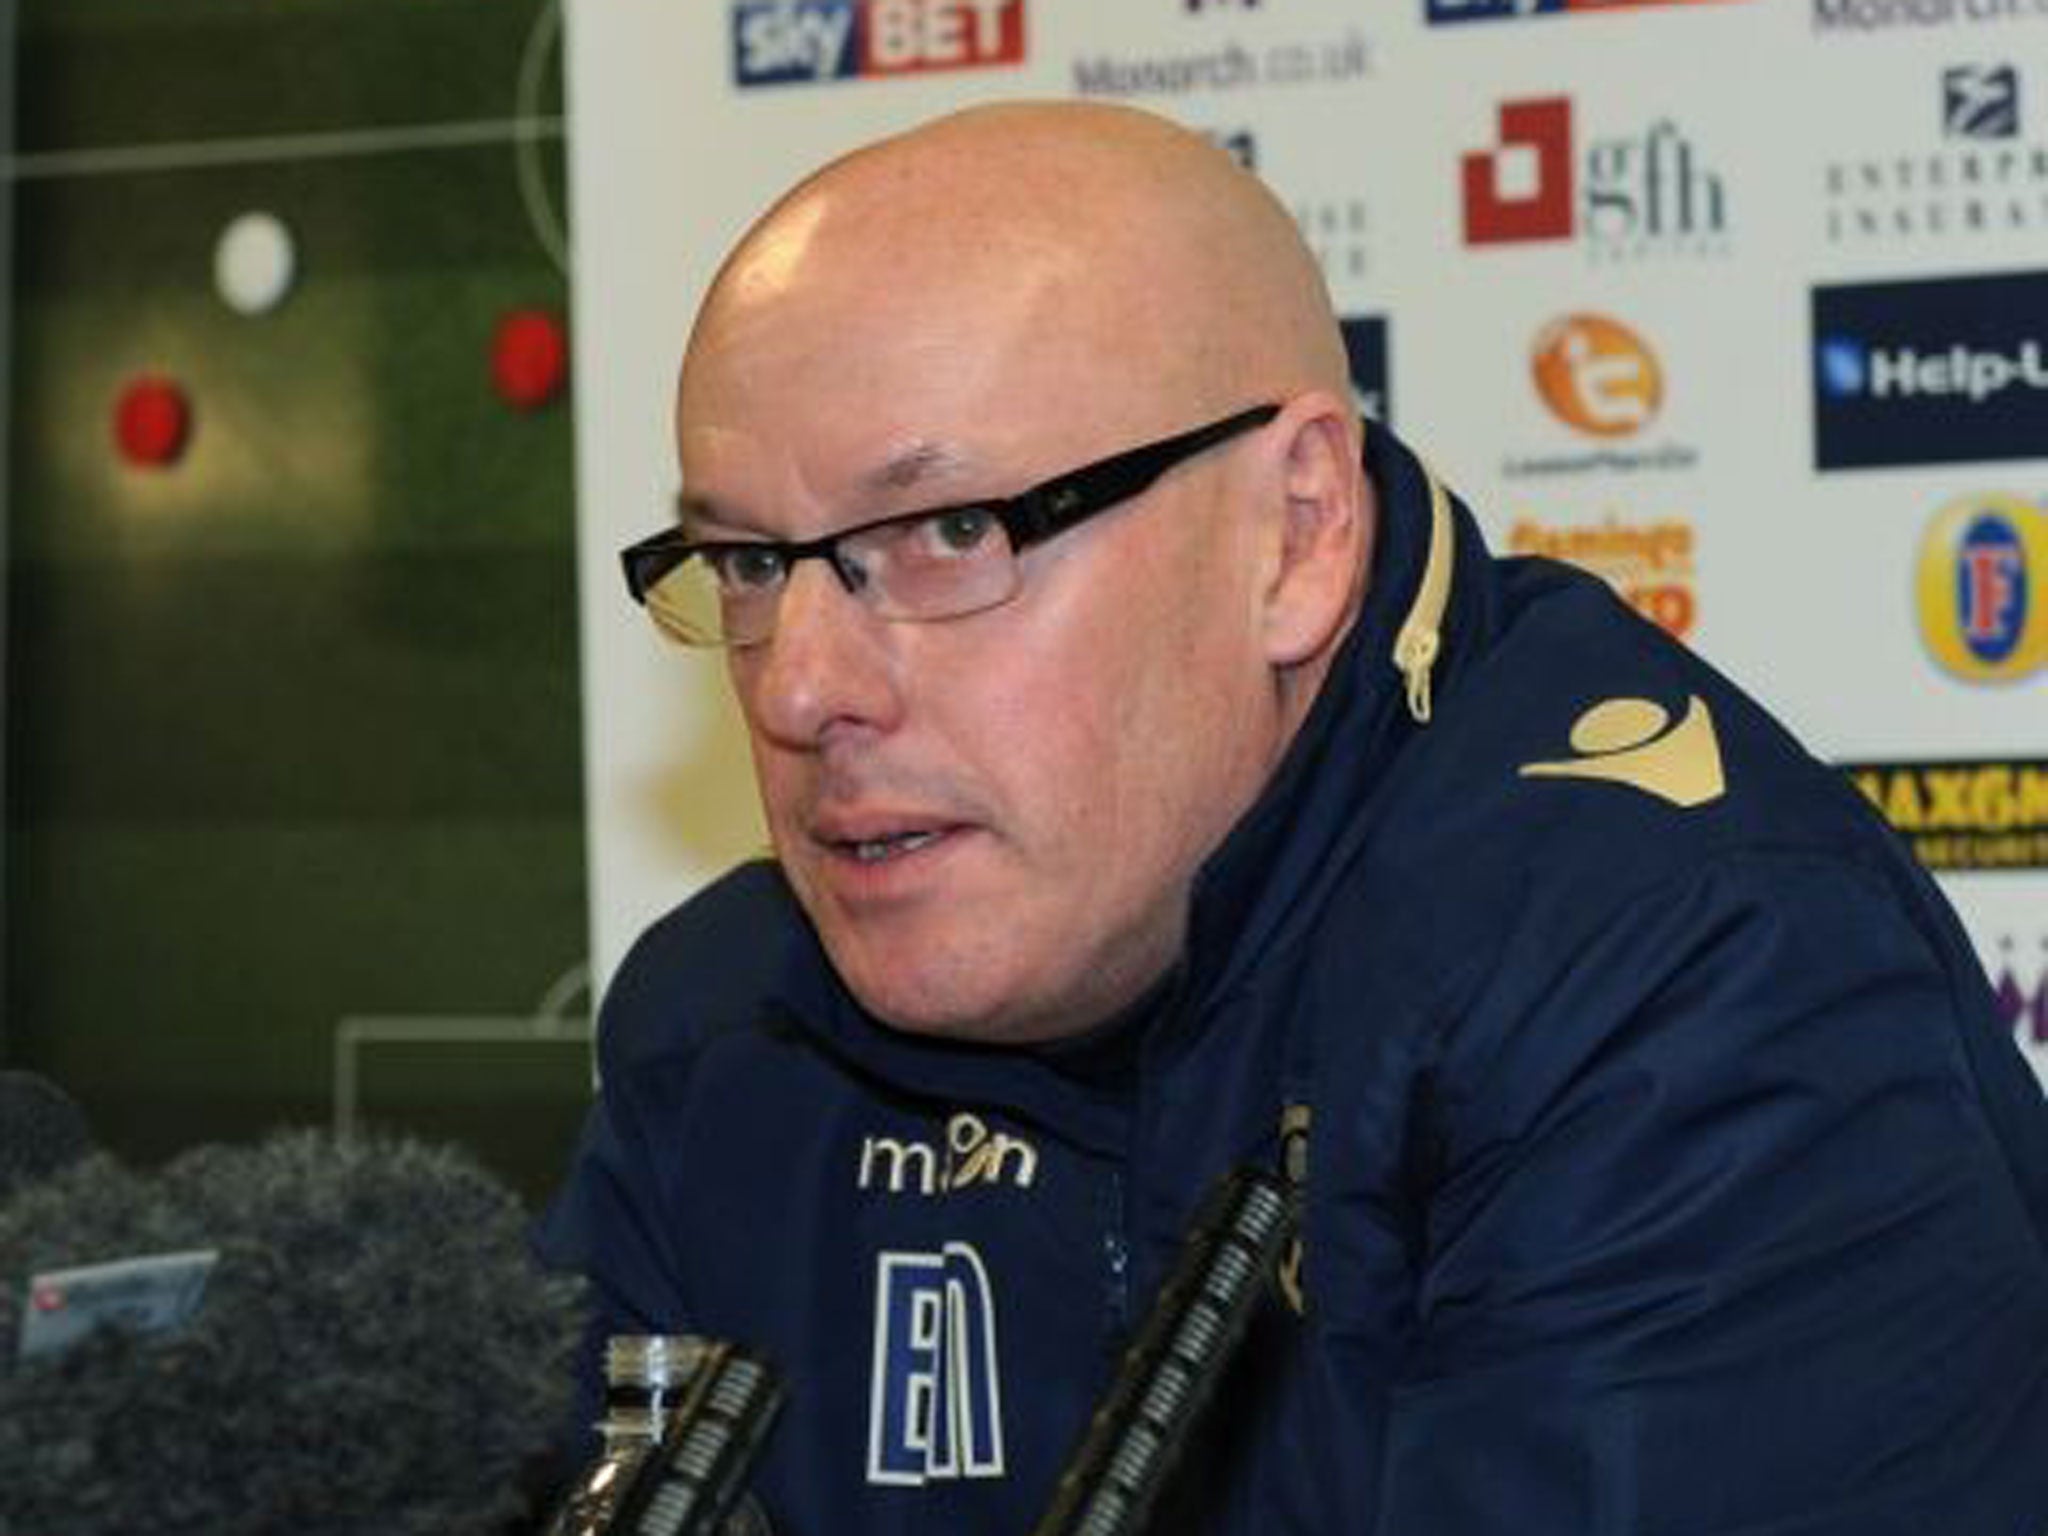 Brian McDermott took training at Leeds yesterday after being told of his sacking on Friday night